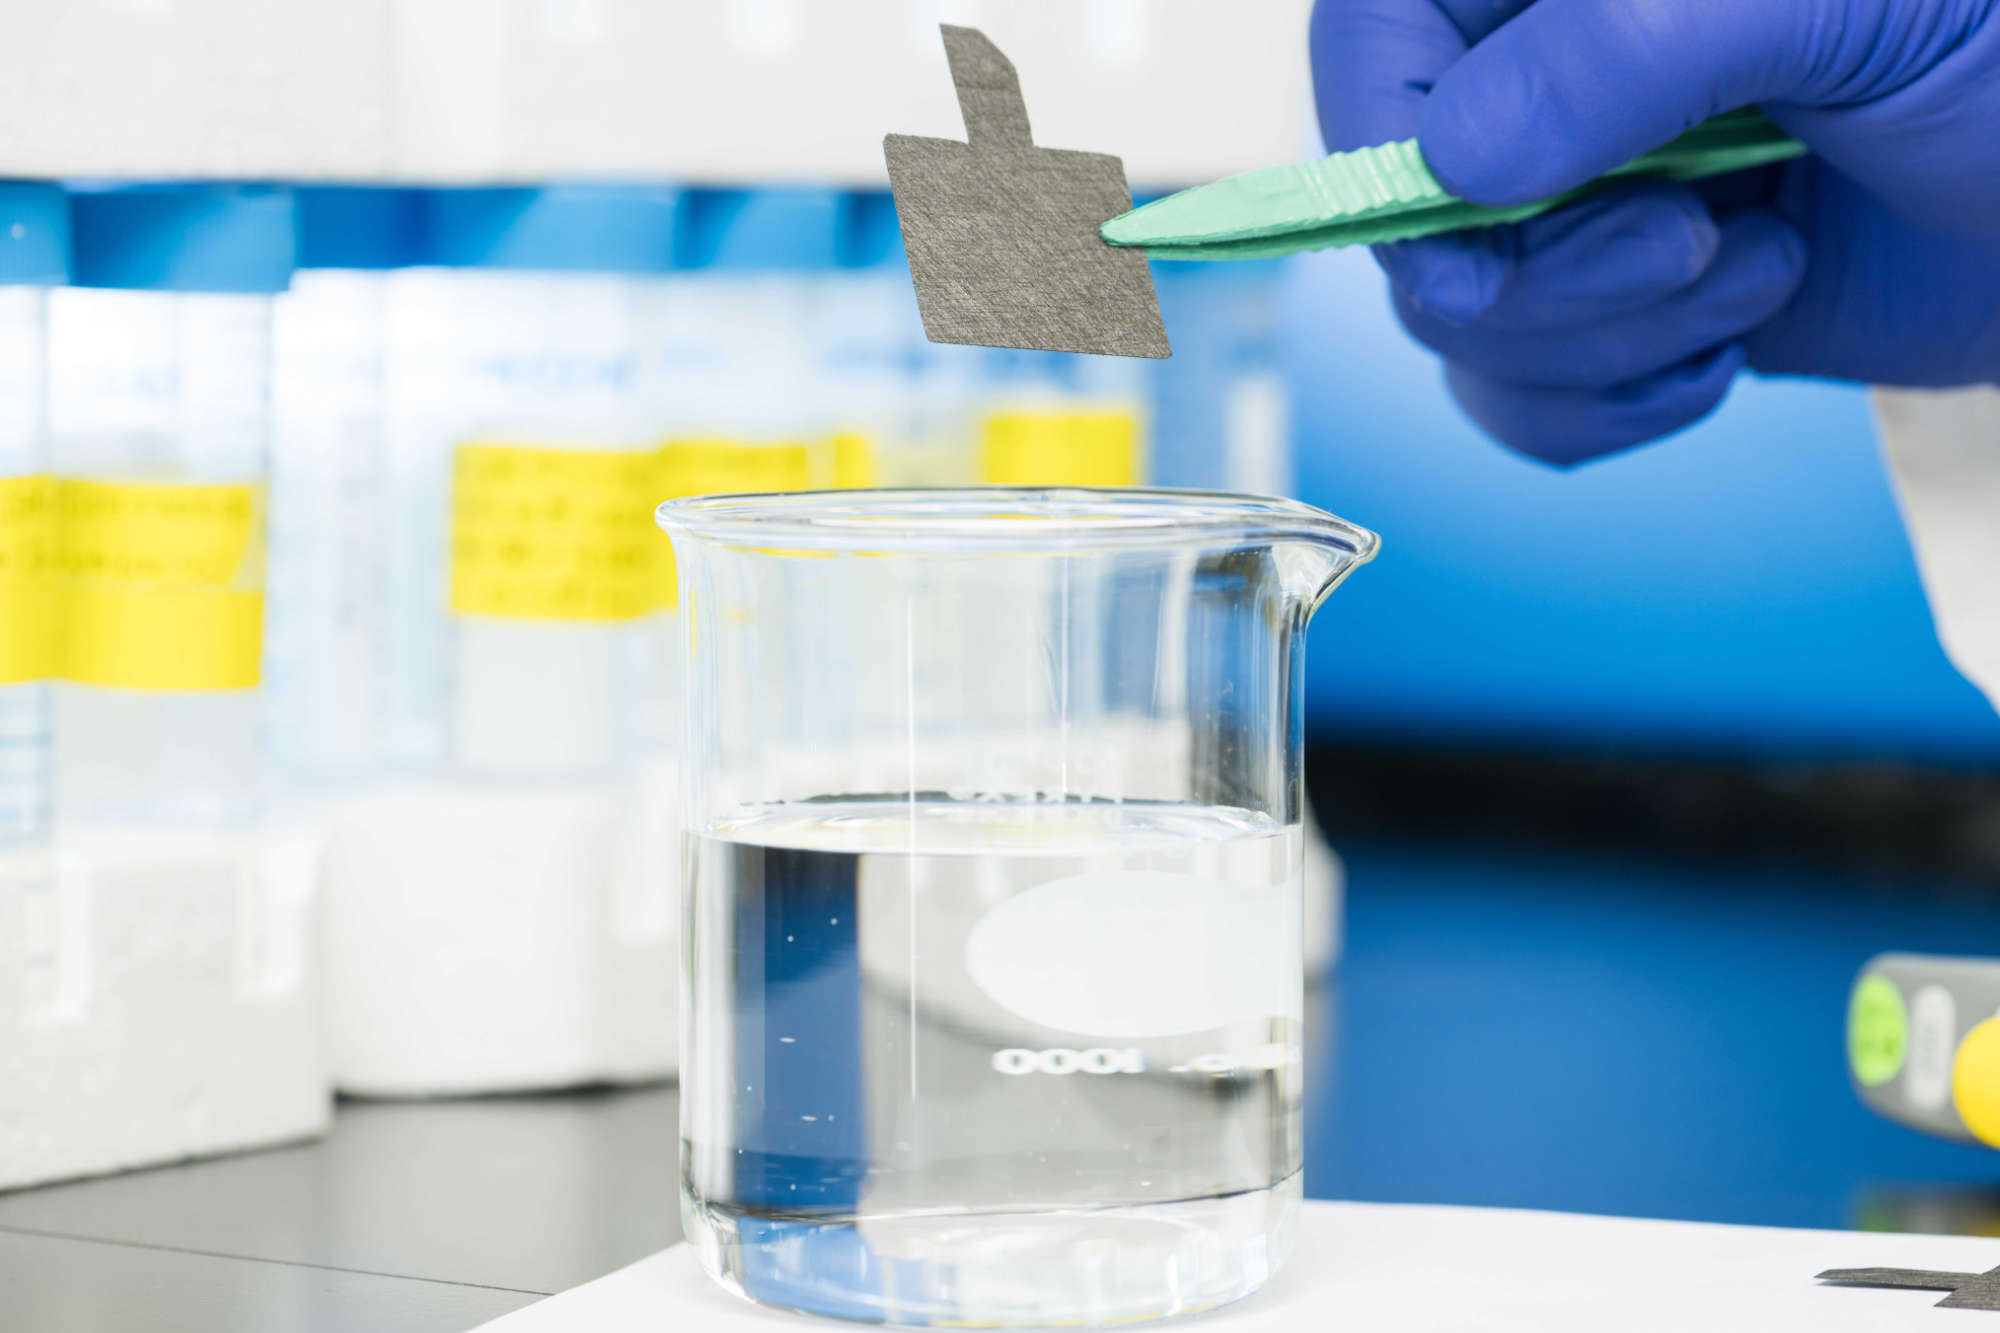 A gloved hands uses tweezers to hold carbon paper above a glass beaker filled with water to illustrate a new technique to remediate PFAS chemicals